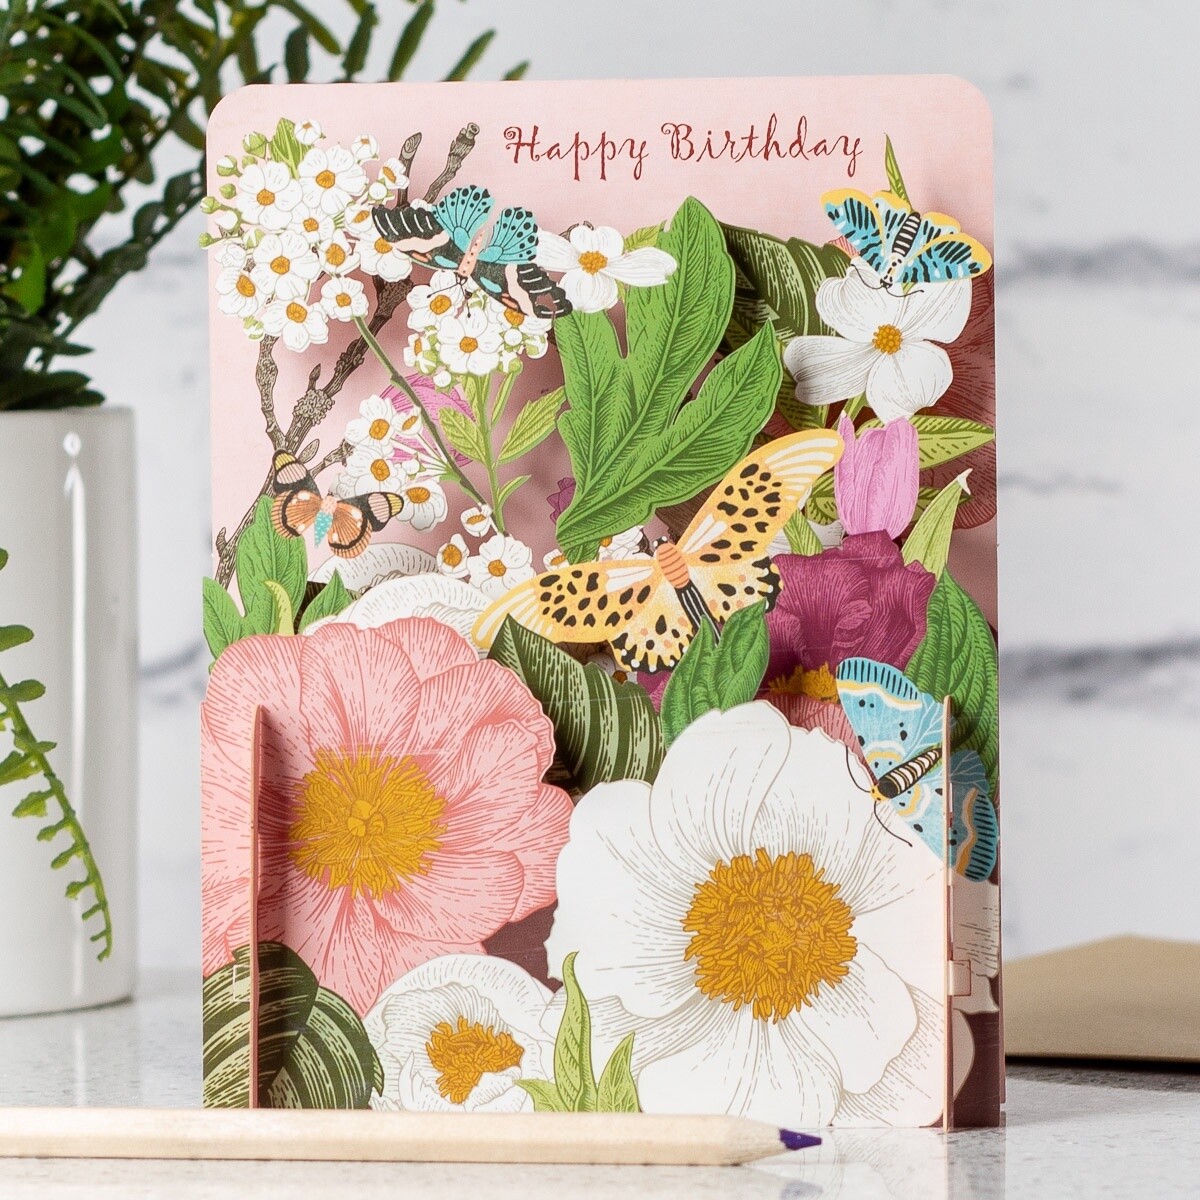 3D Pop Up Card - Butterflies and Flowers Birthday by Alljoy